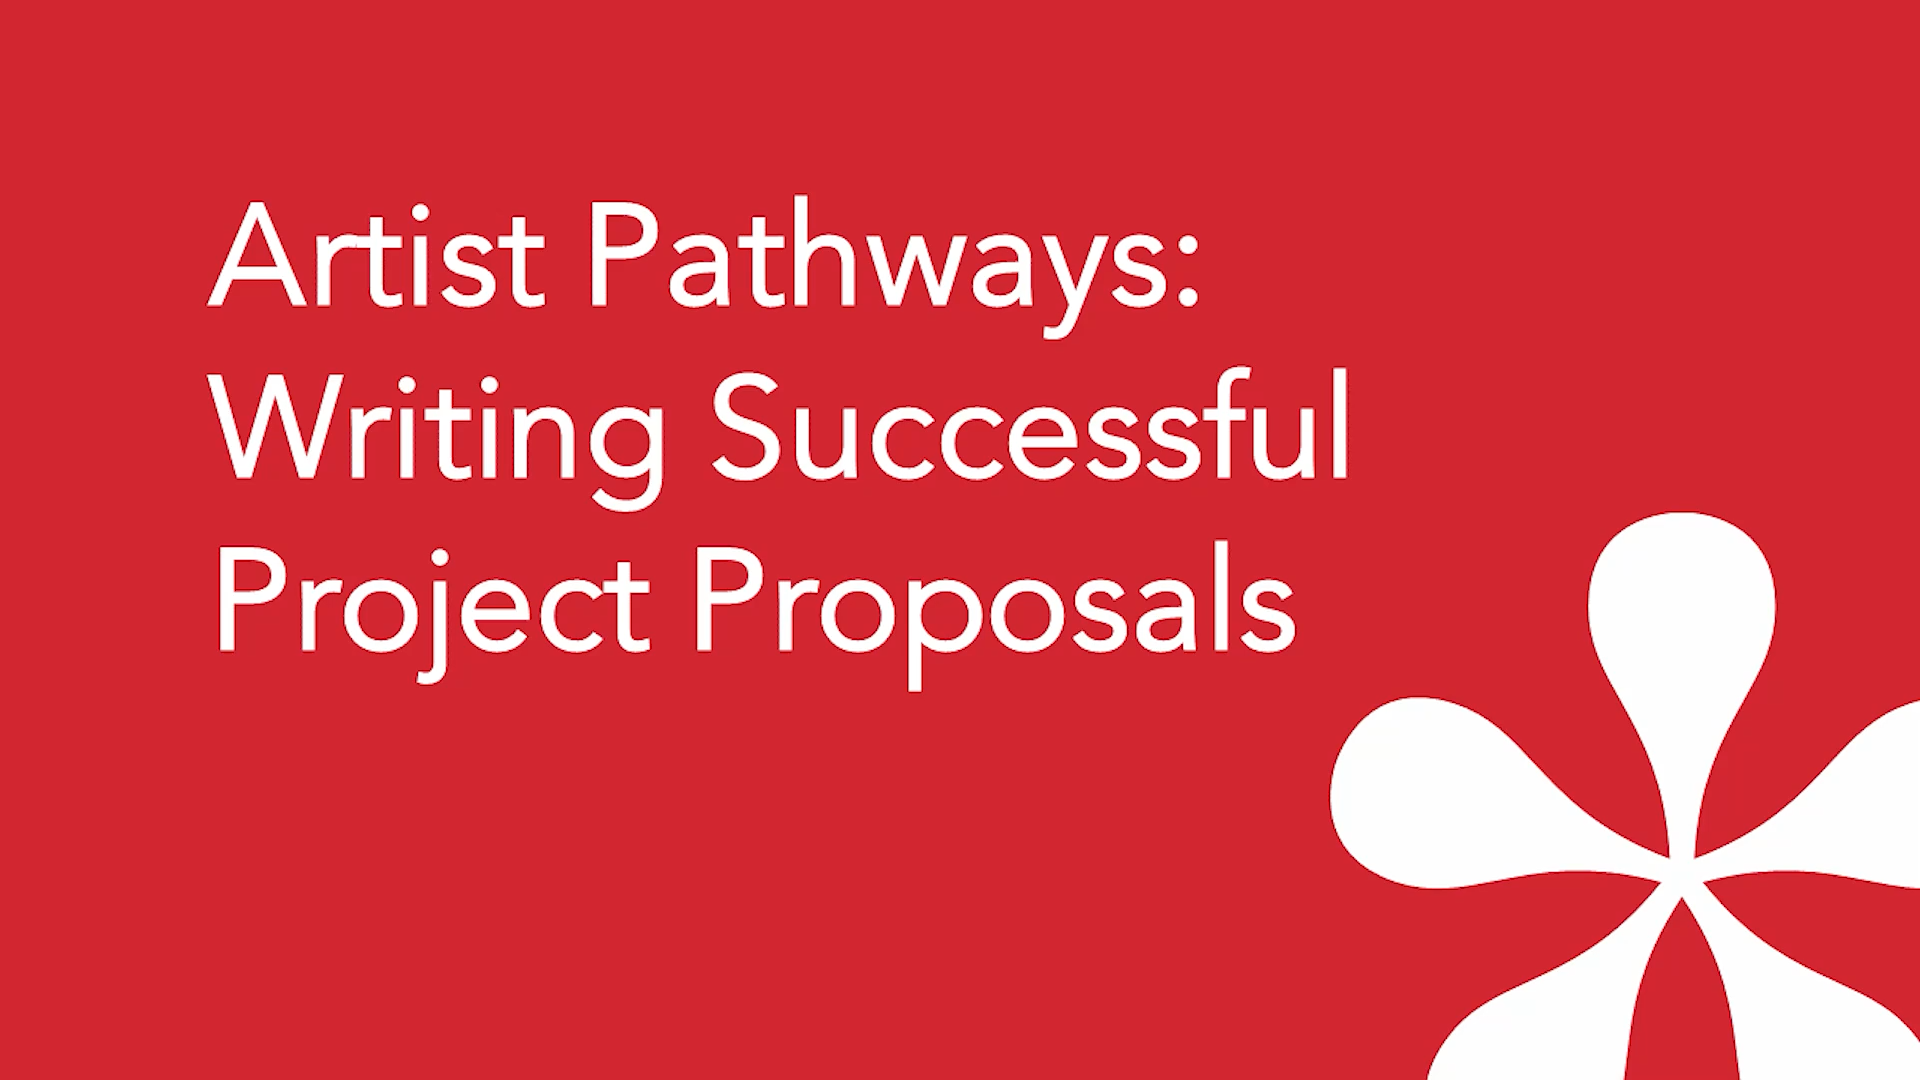 Artist Pathways: Writing Successful Project Proposals